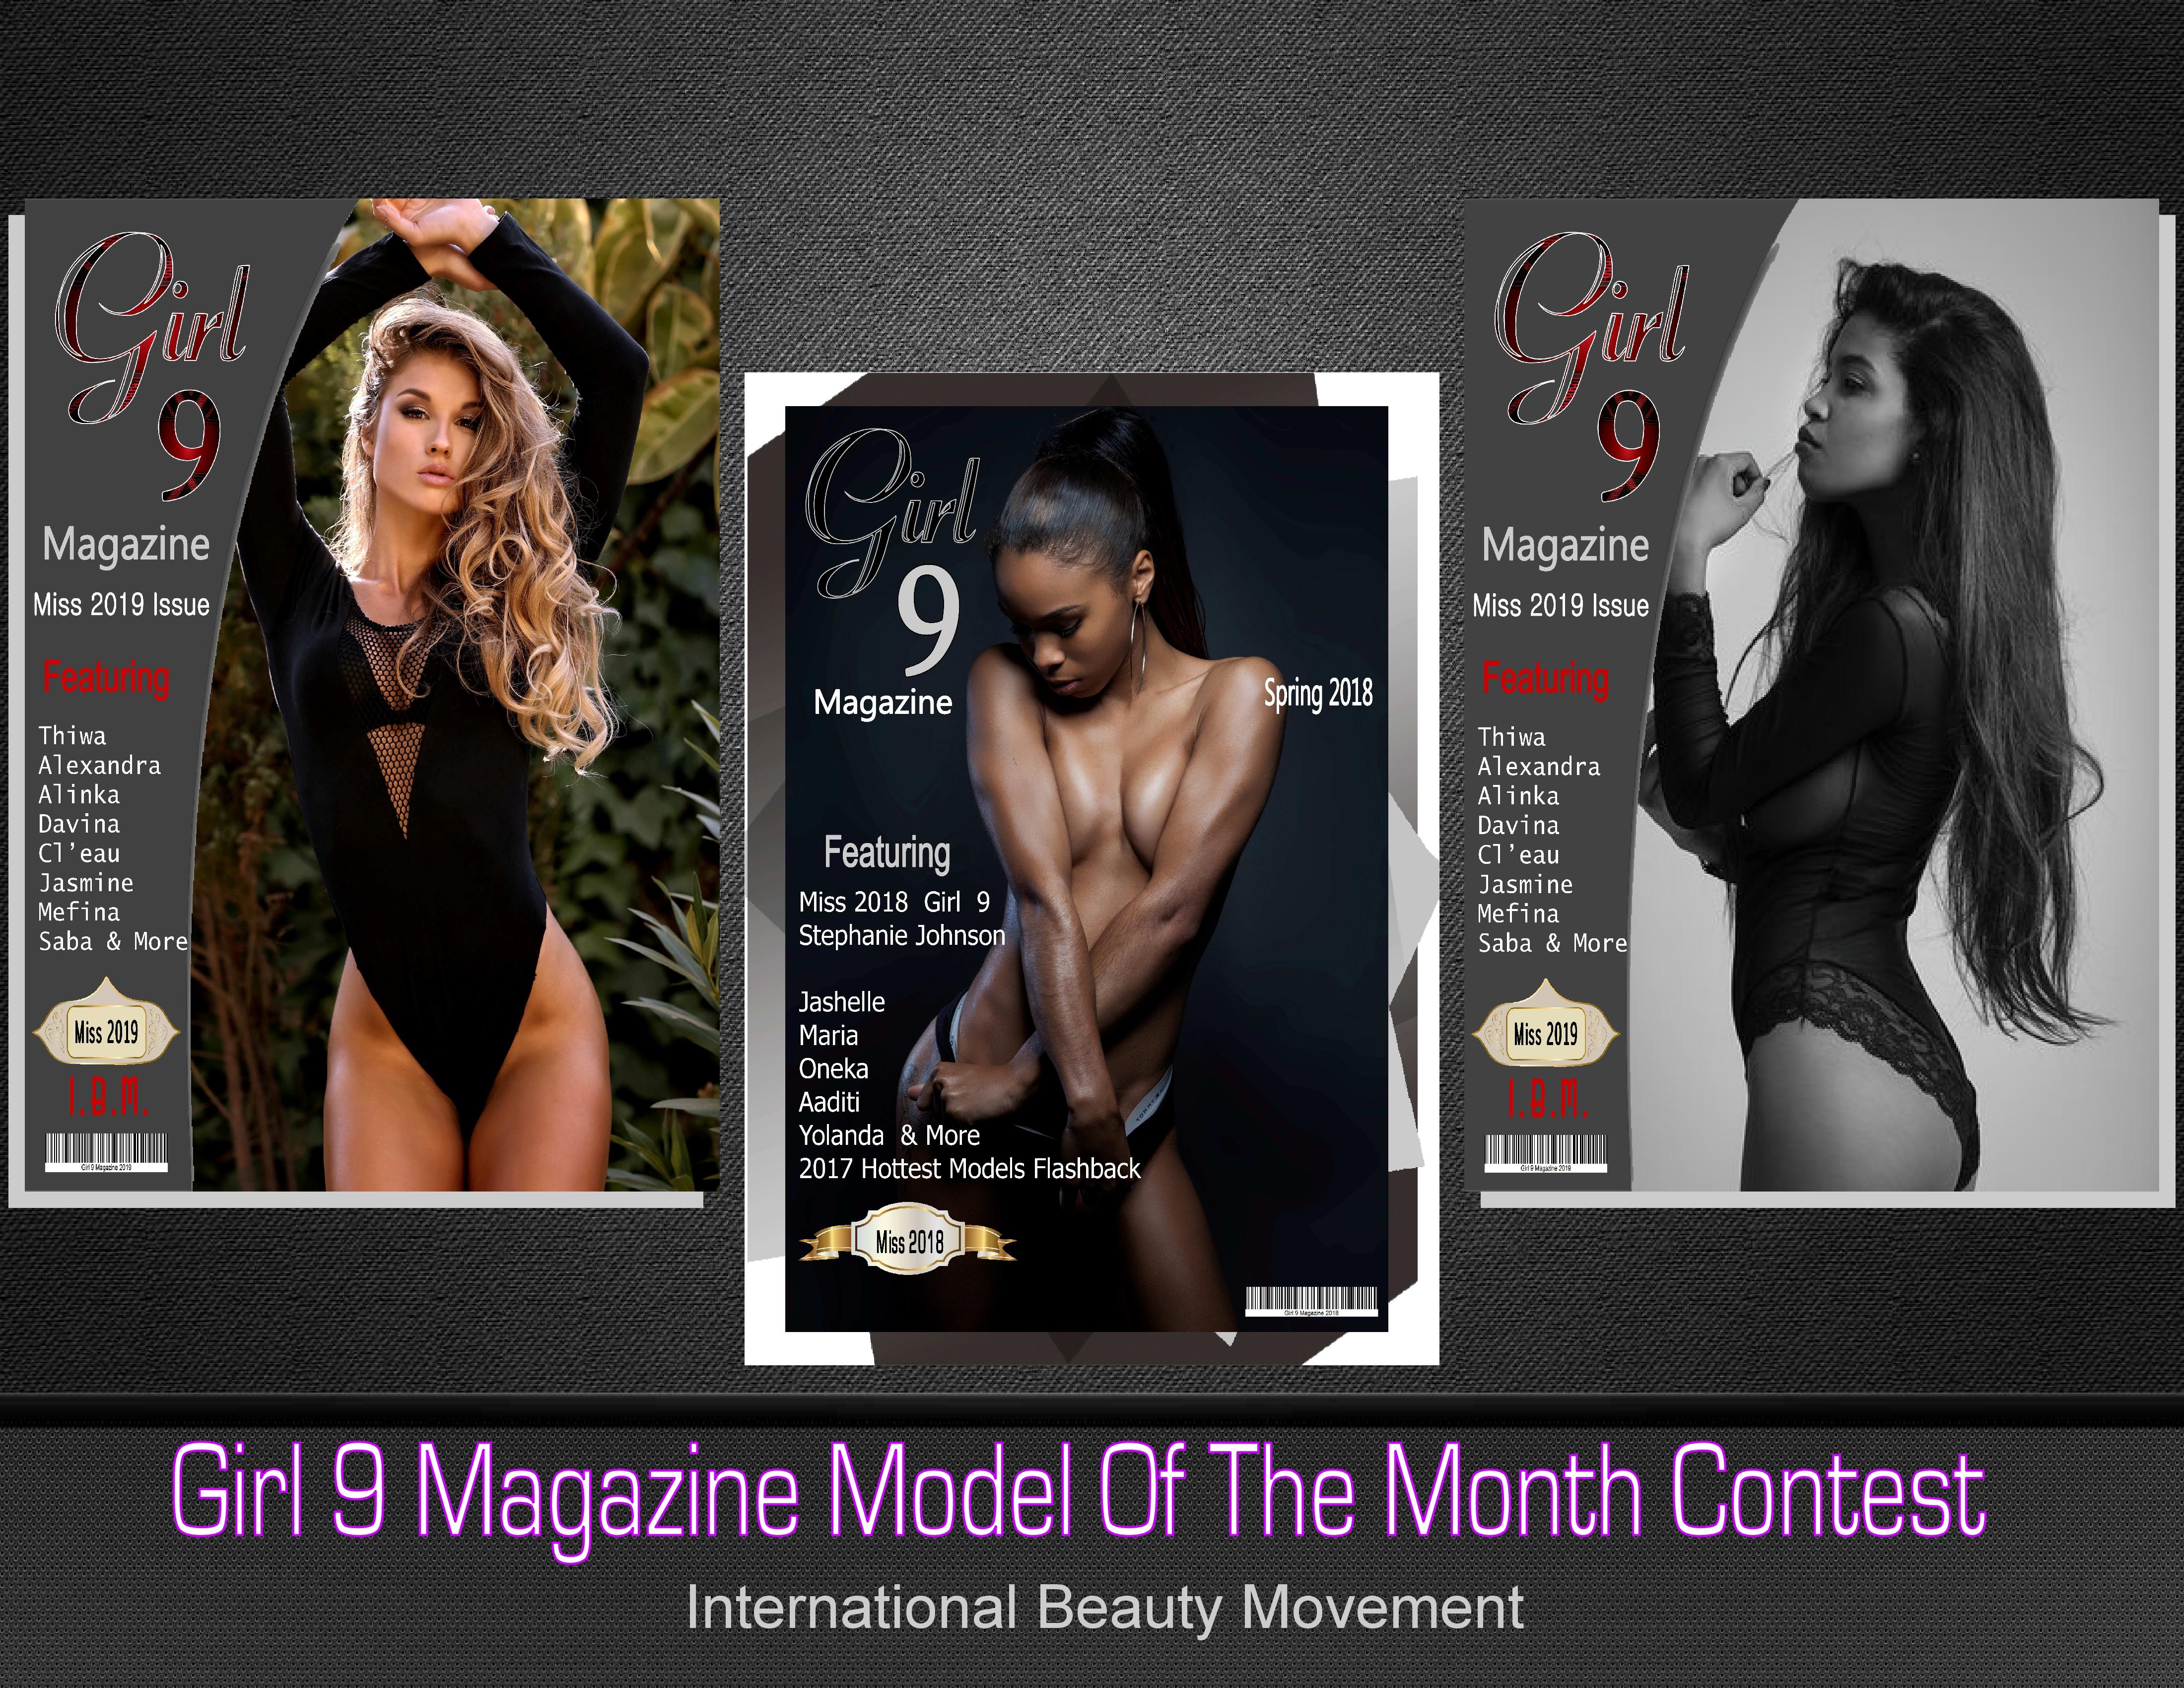 Girl 9 Magazine Free Lingerie Model of the Month Contest